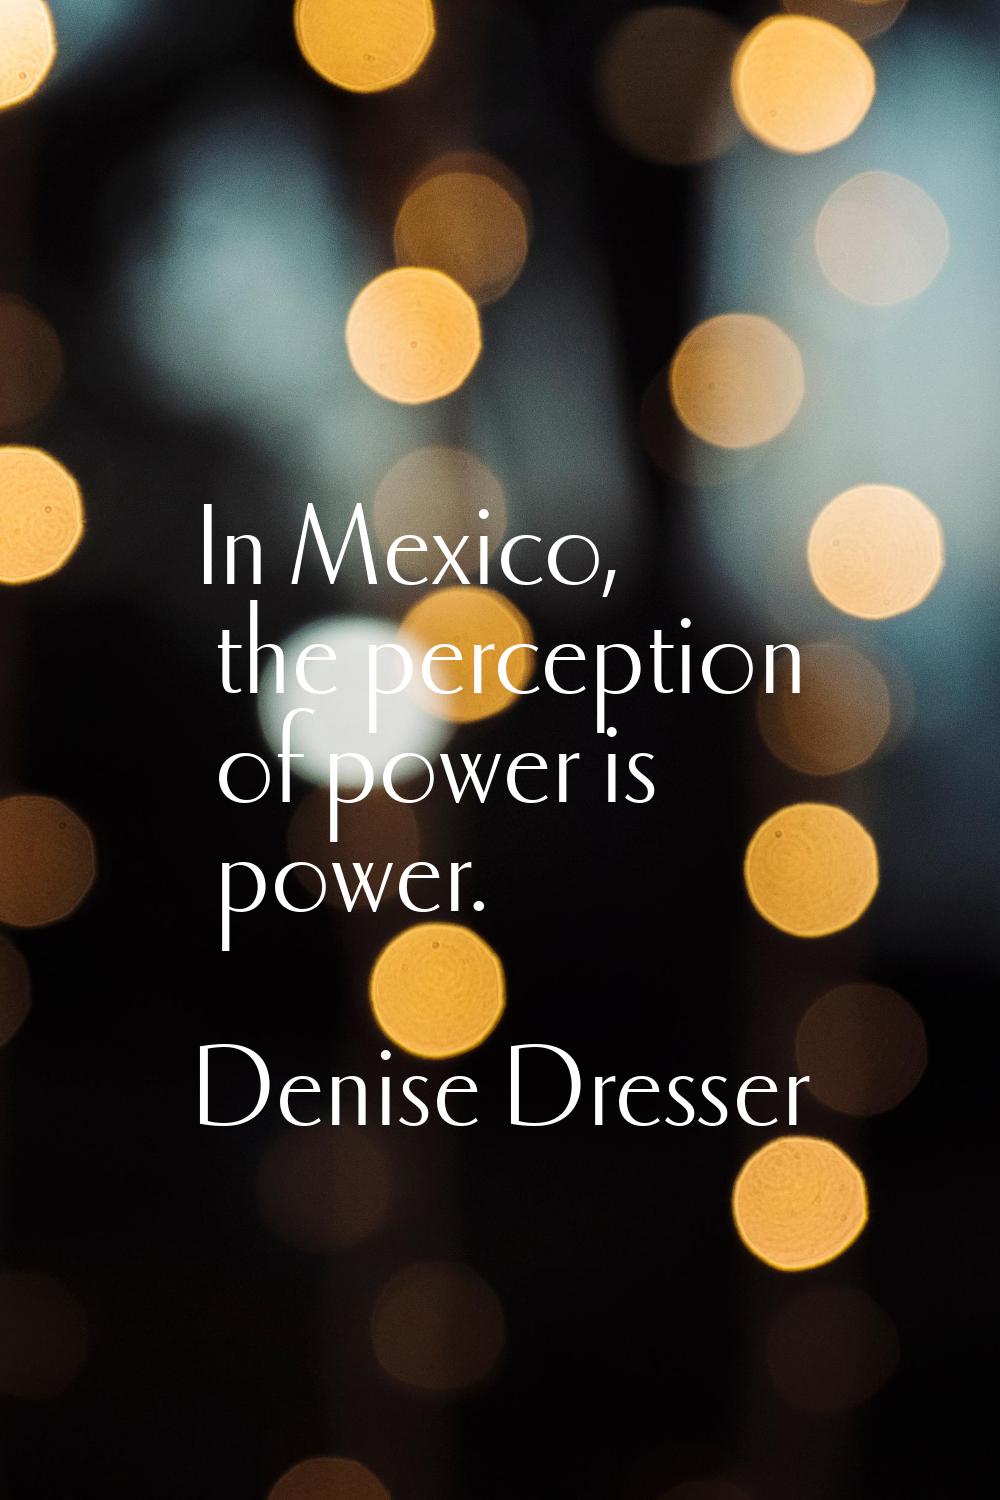 In Mexico, the perception of power is power.